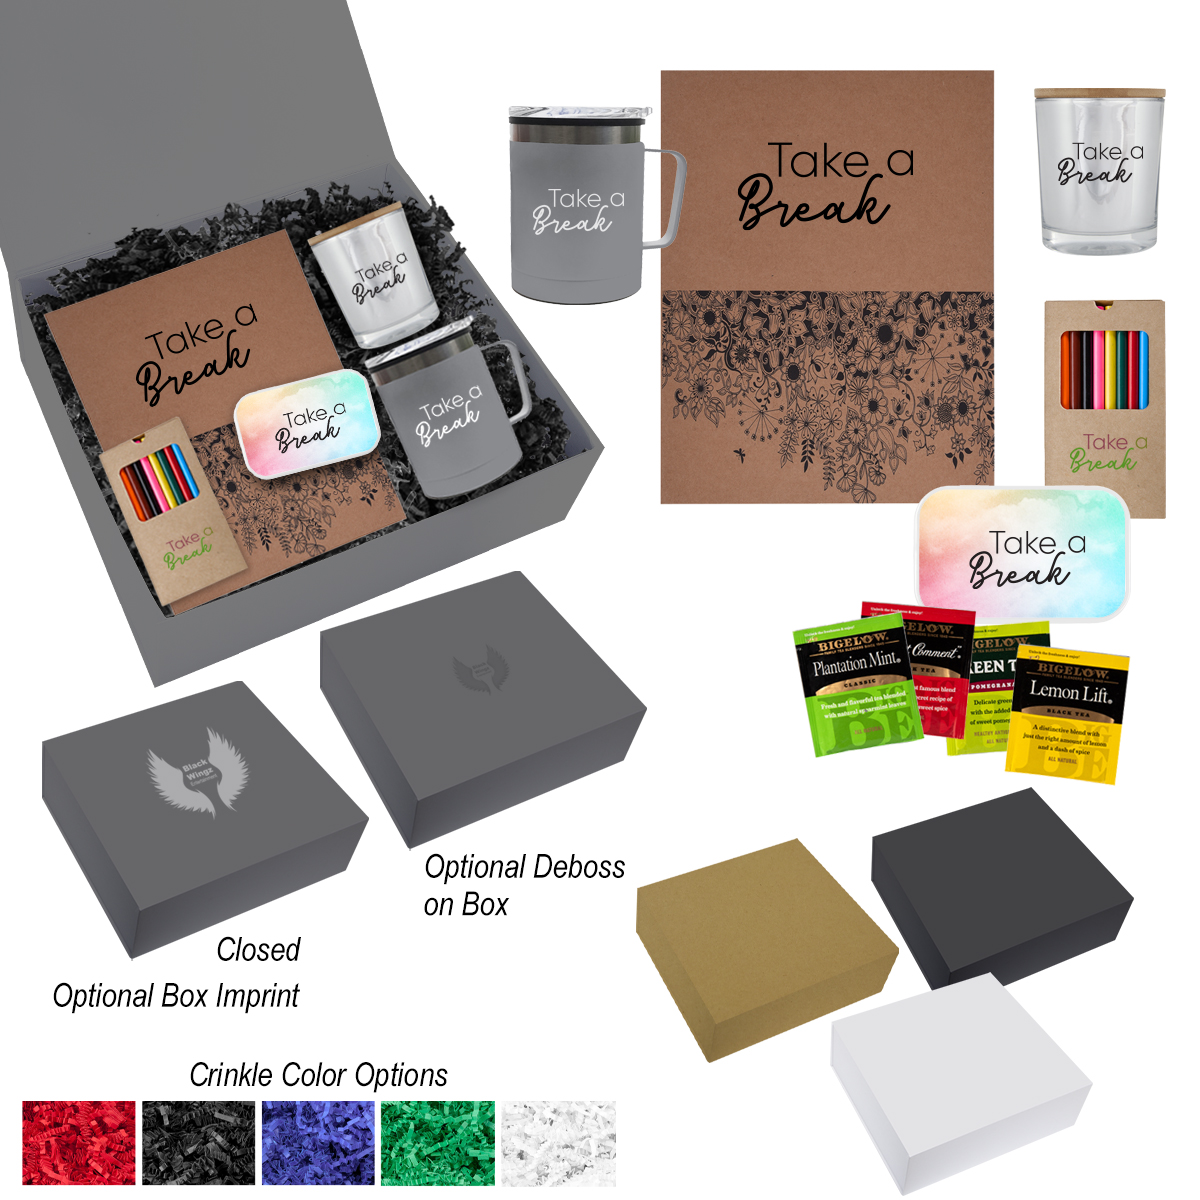 #95145 Self Care Tea Gift Set - Hit Promotional Products